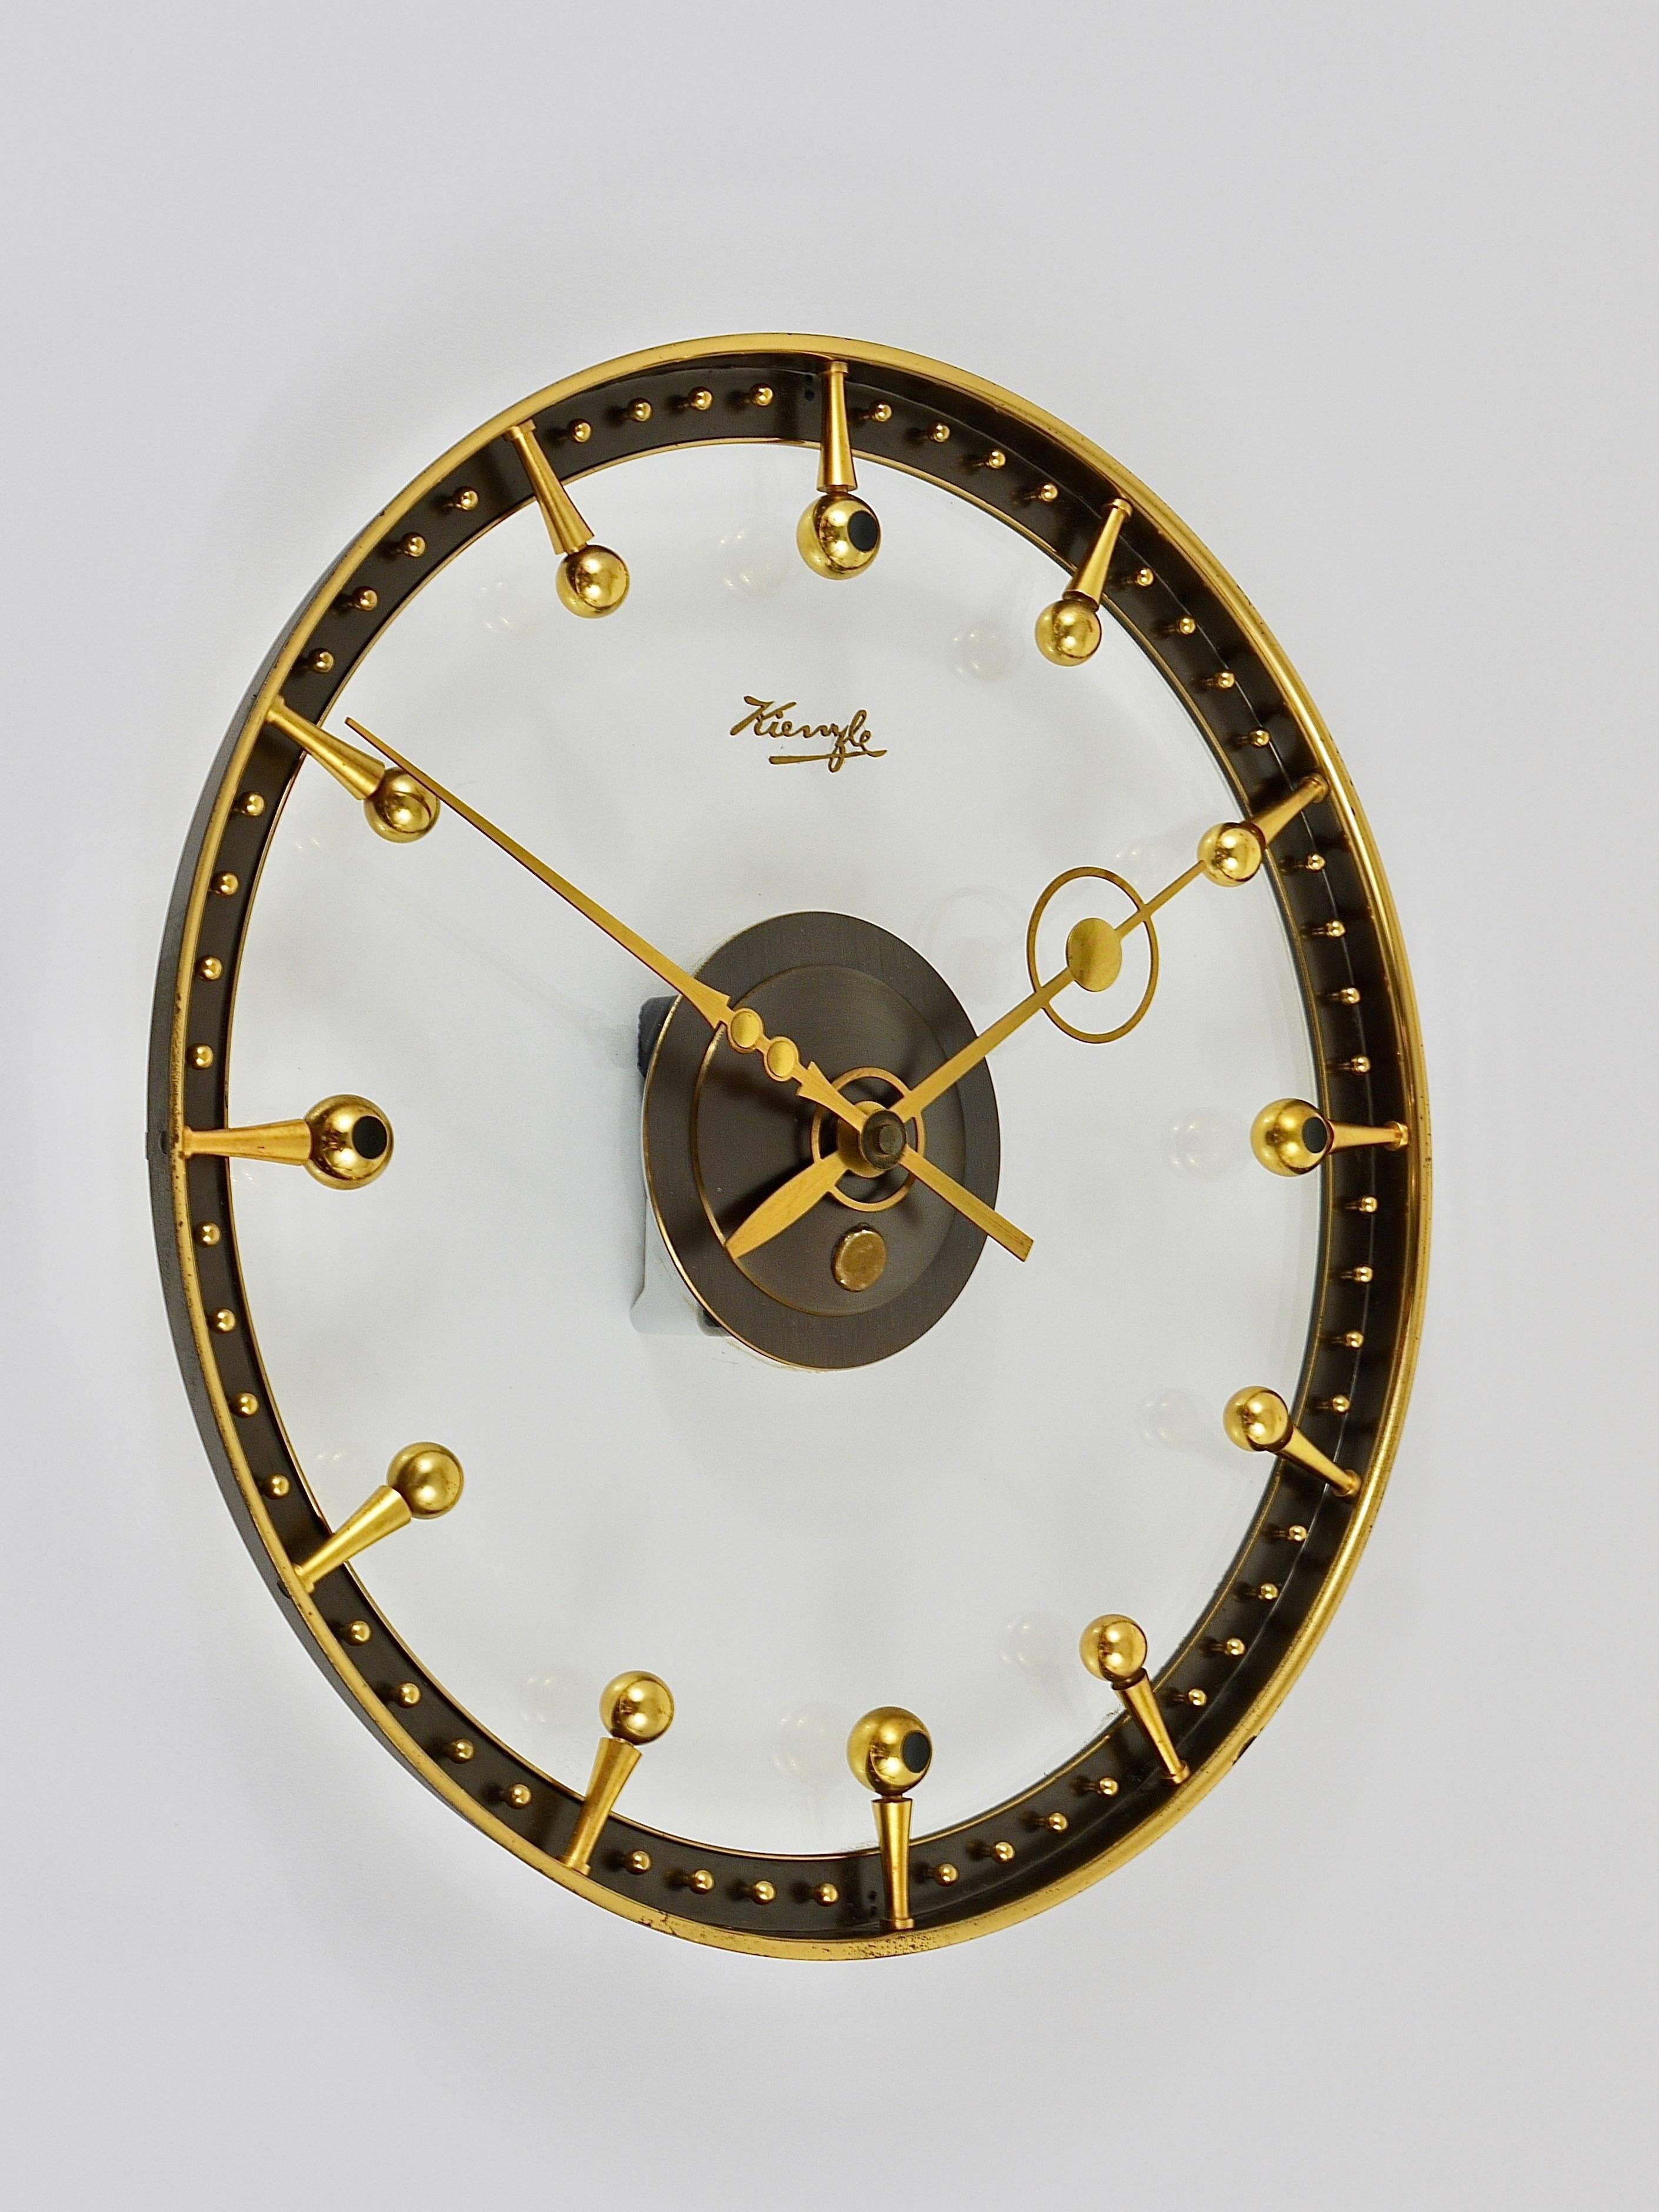 Outstanding Mid-Century Brass and Glass Wall Clock by Kienzle, Germany, 1950s 1